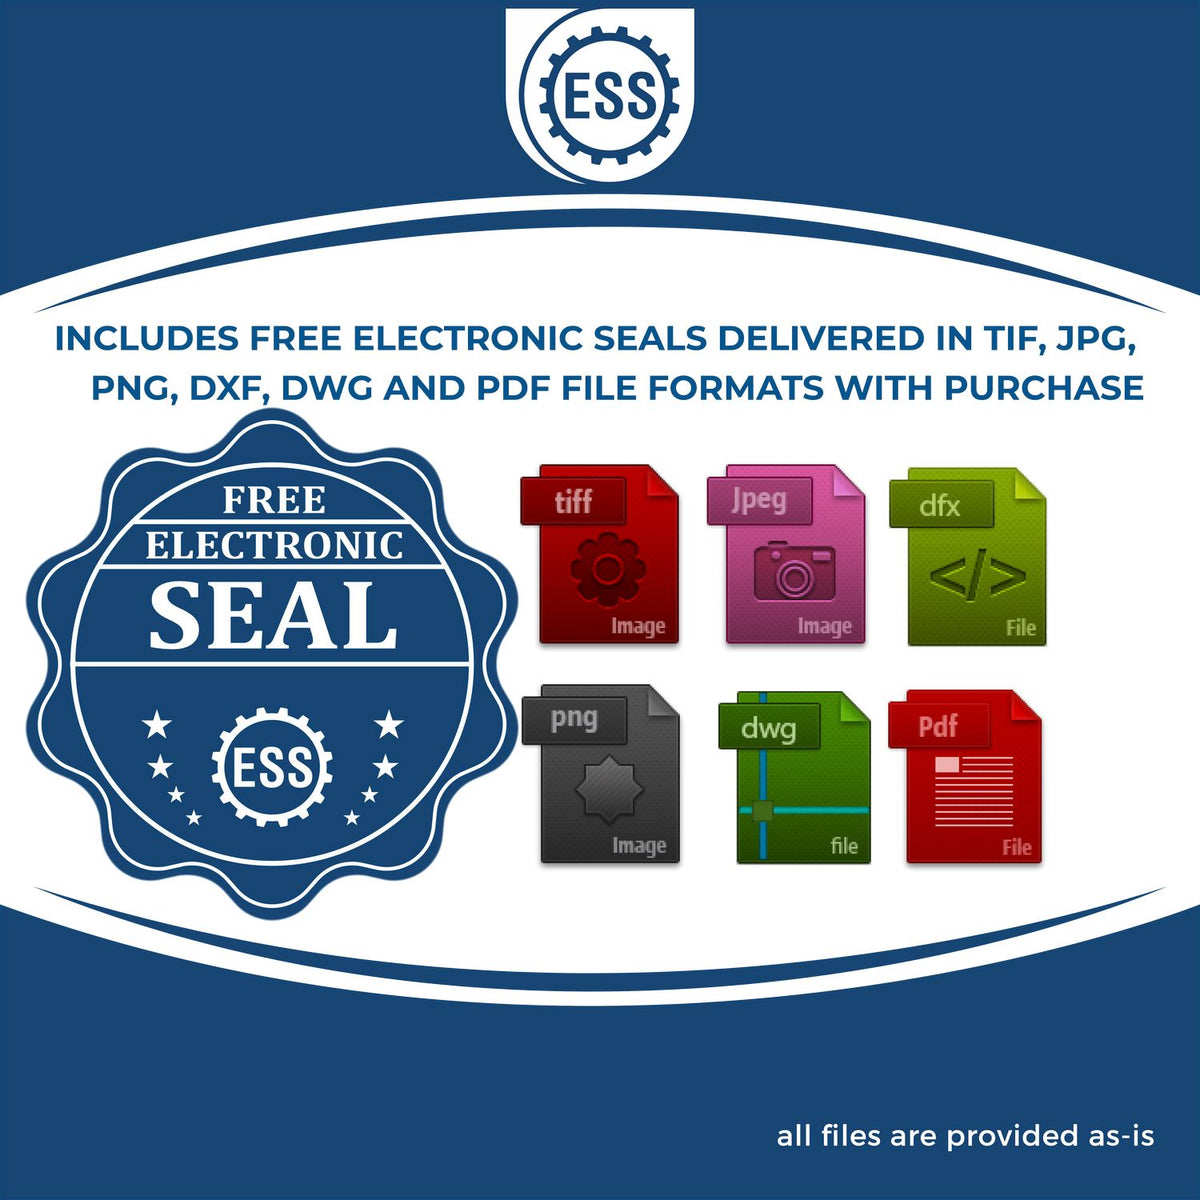 An infographic for the free electronic seal for the Gift Oklahoma Architect Seal illustrating the different file type icons such as DXF, DWG, TIF, JPG and PNG.